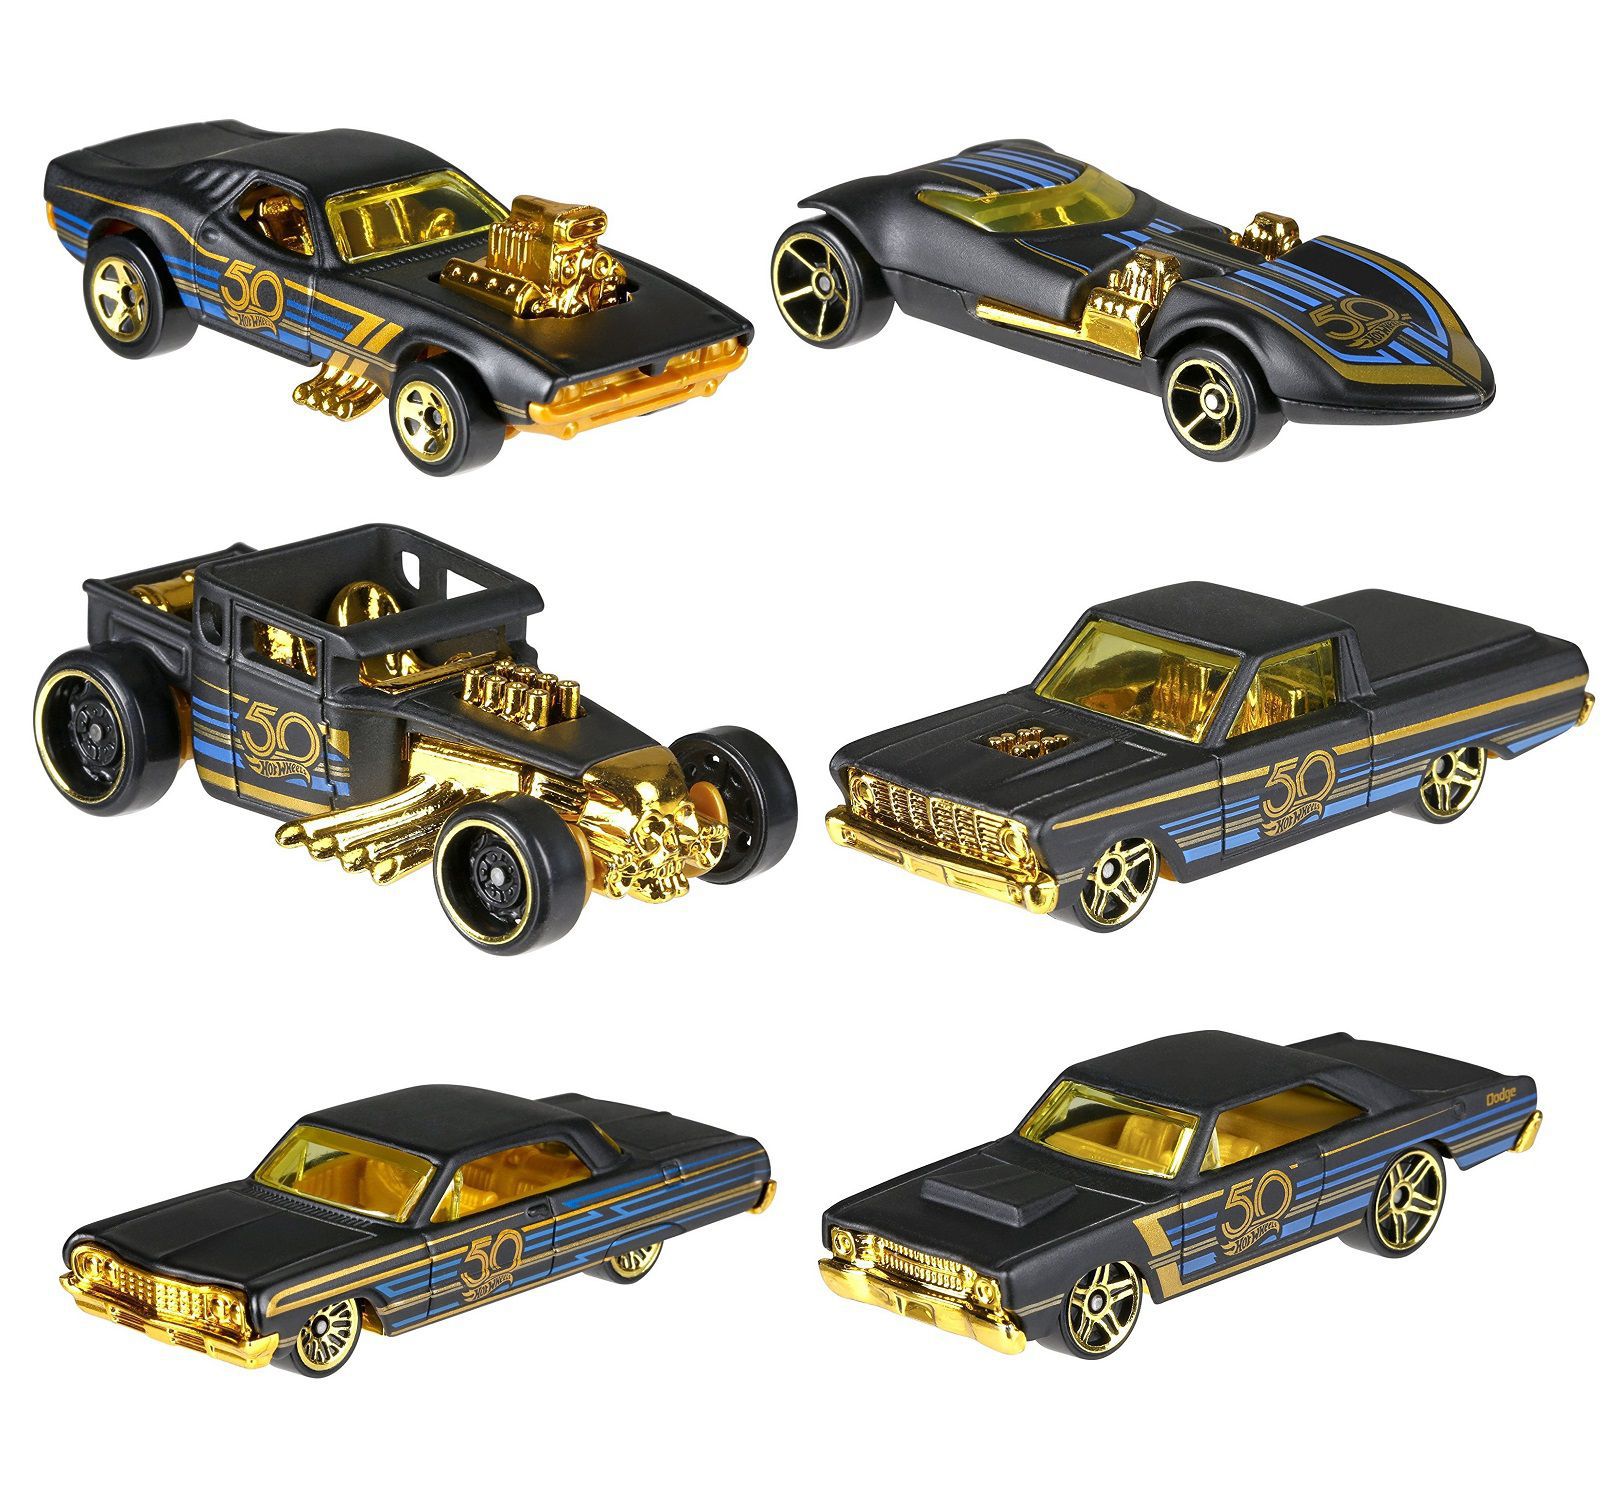 Hot Wheels 50th Anniversary Black Gold Edition Cars-Pack ...